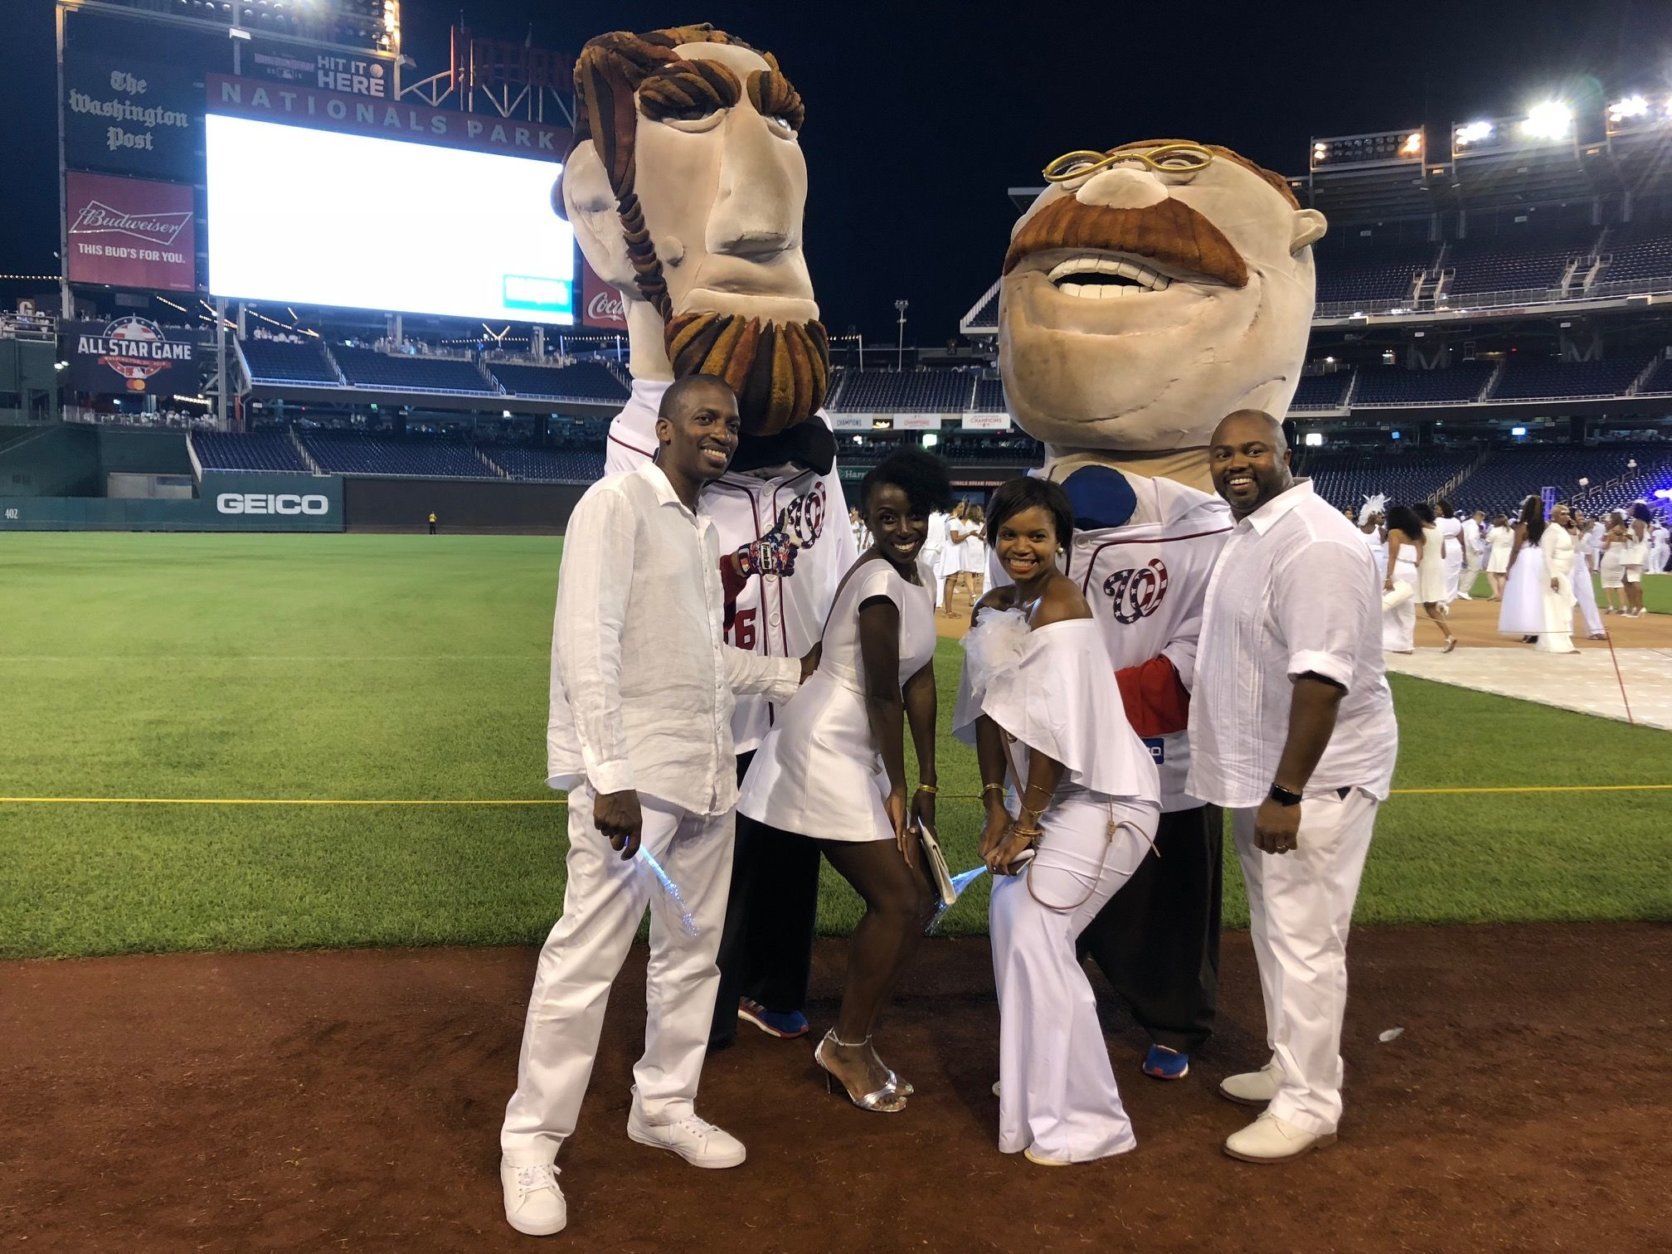 The fifth edition of Diner en Blanc, the white clothing-only pop-up dinner party took over Nats Park on Saturday, August 25. Abe and Teddy wore their white jerseys, of course.